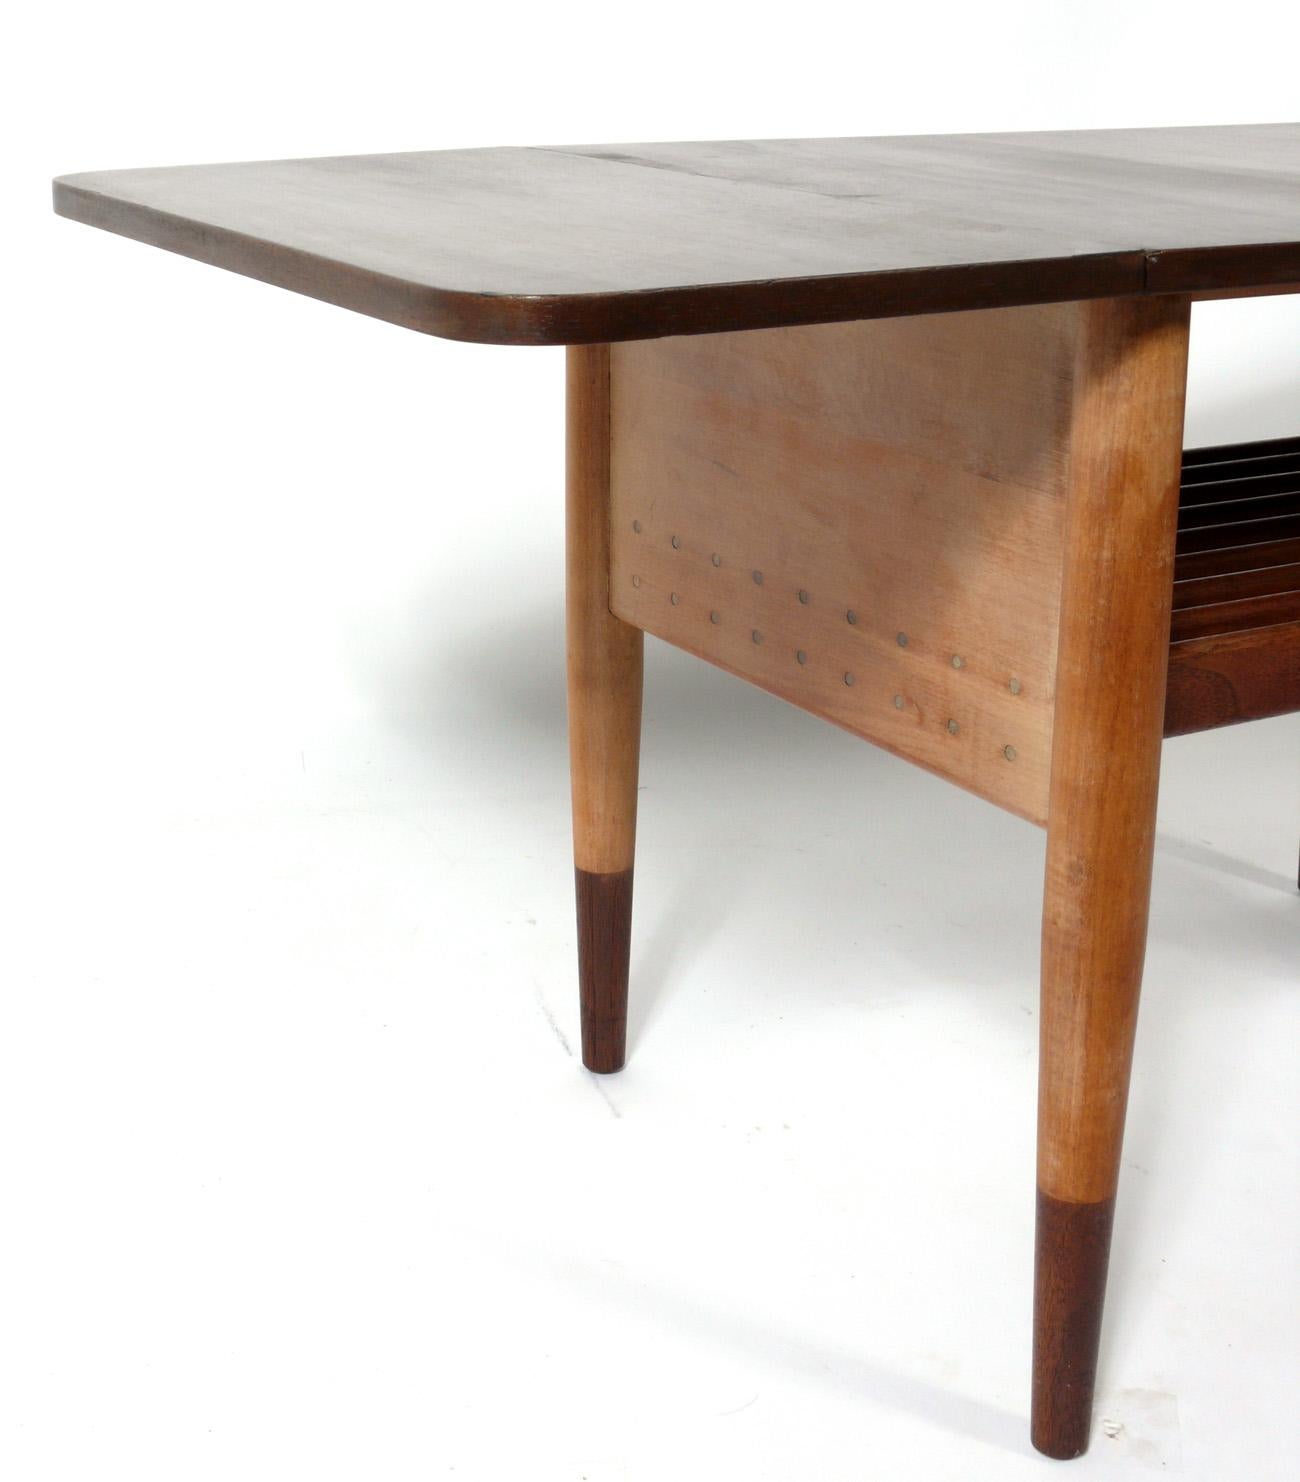 Rare Danish modern design coffee or end table, designed by Finn Juhl for Baker, American, circa 1950s. Signed with Baker medallion and branded model number underneath. Constructed of beech and walnut. This piece is a versatile size and can be used